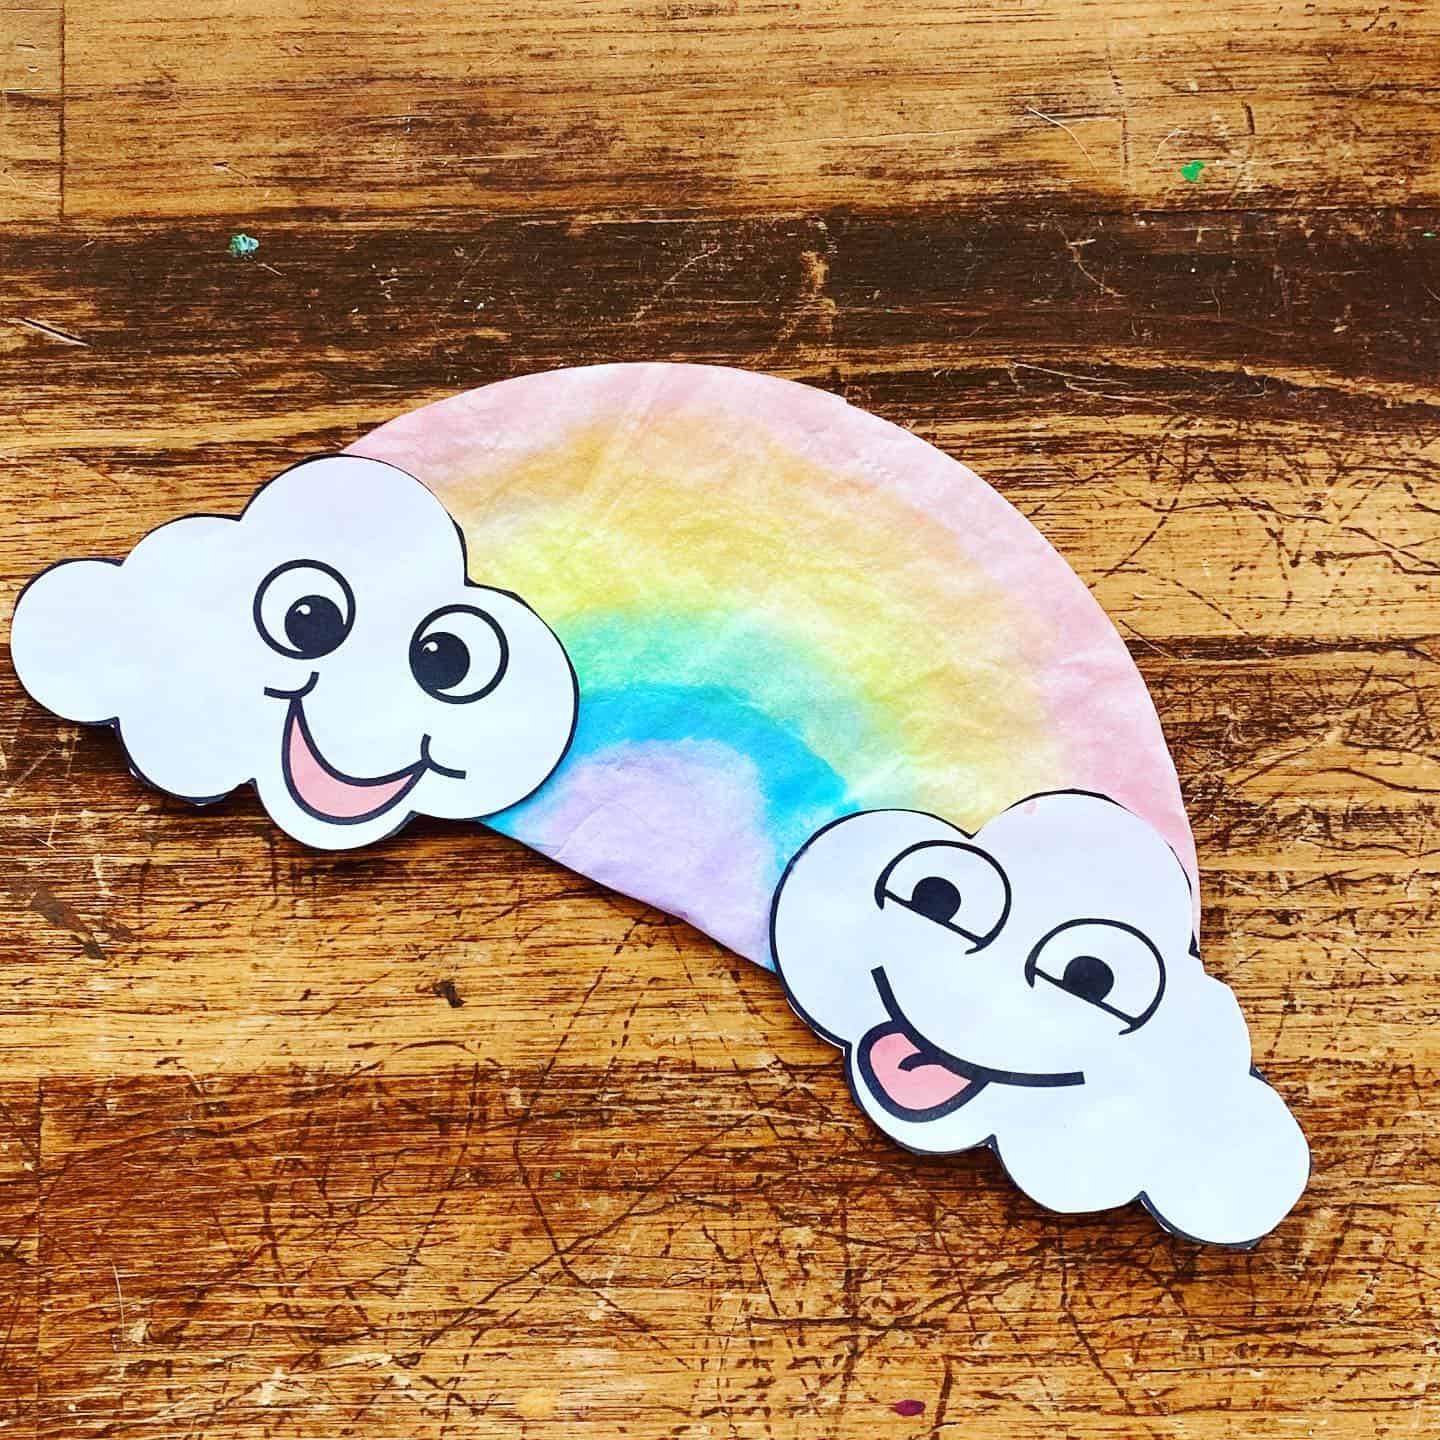 Rainbow Coffee Filter Craft For Kids